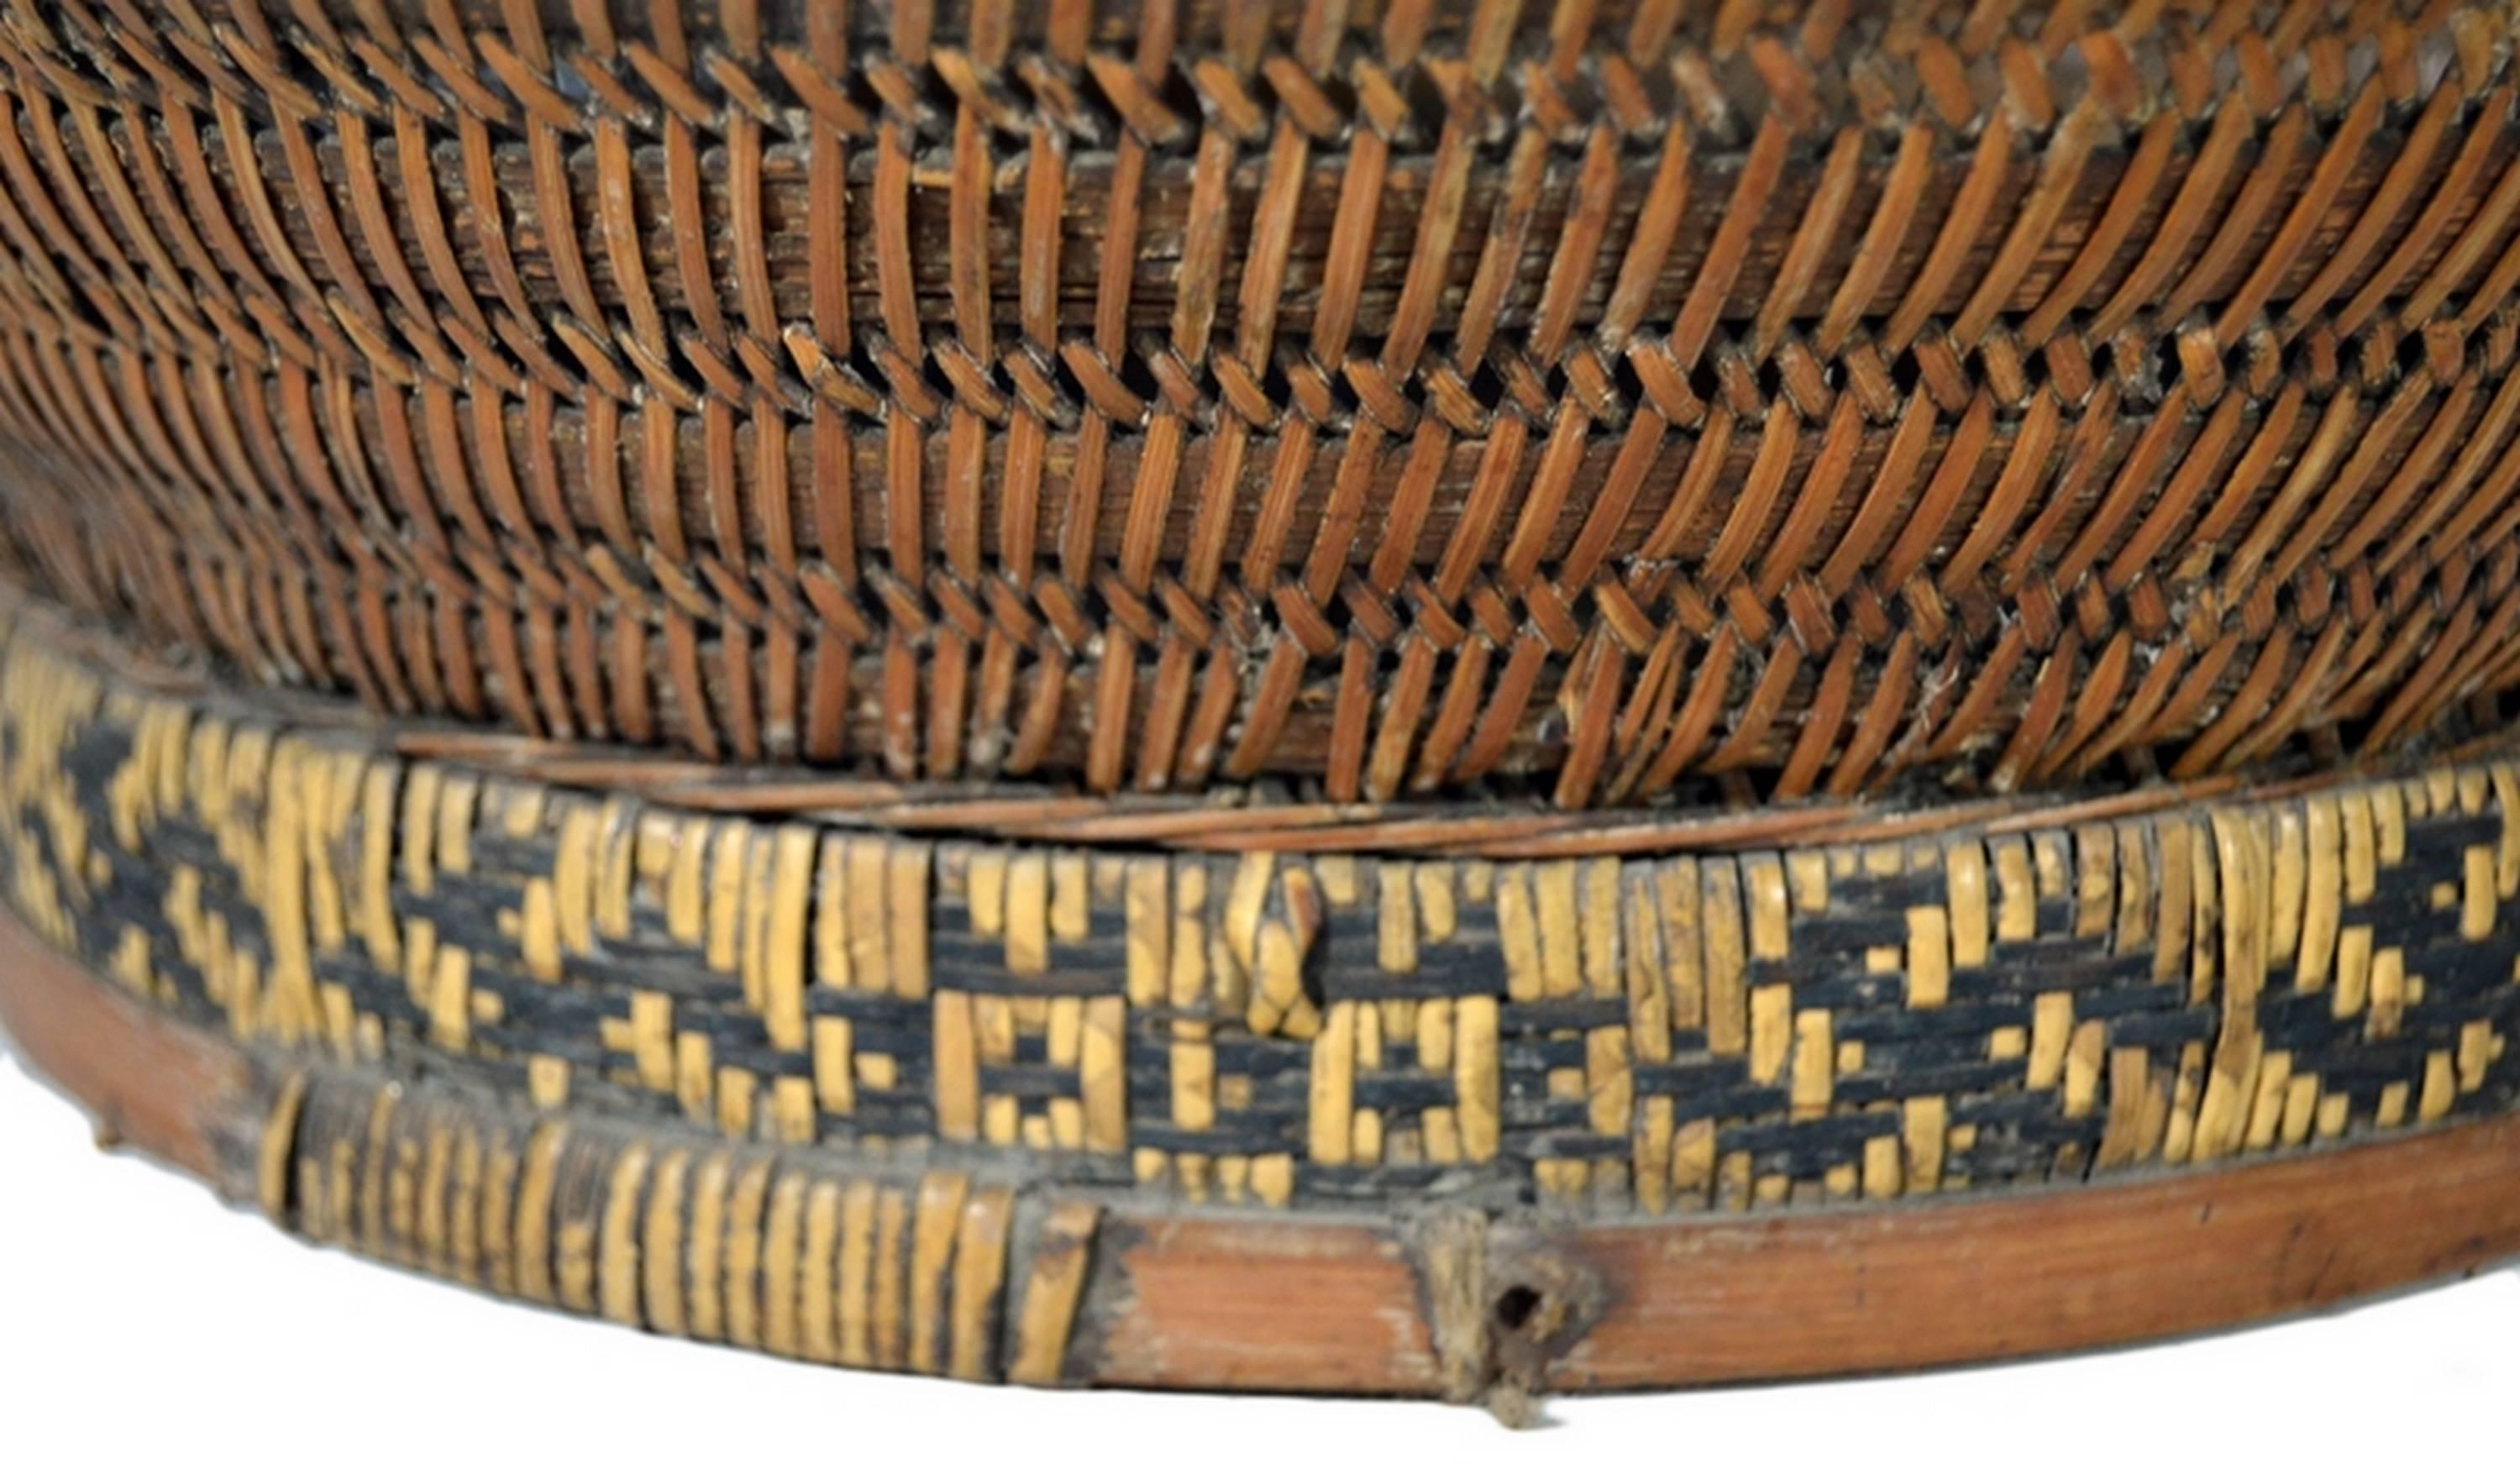 A 19th century Chinese grain basket handwoven of cane and bamboo. In 19th century China baskets such as these were used to store or transport grain. It features a base of cane, woven with an intricate star-shaped pattern on a bamboo framework. The